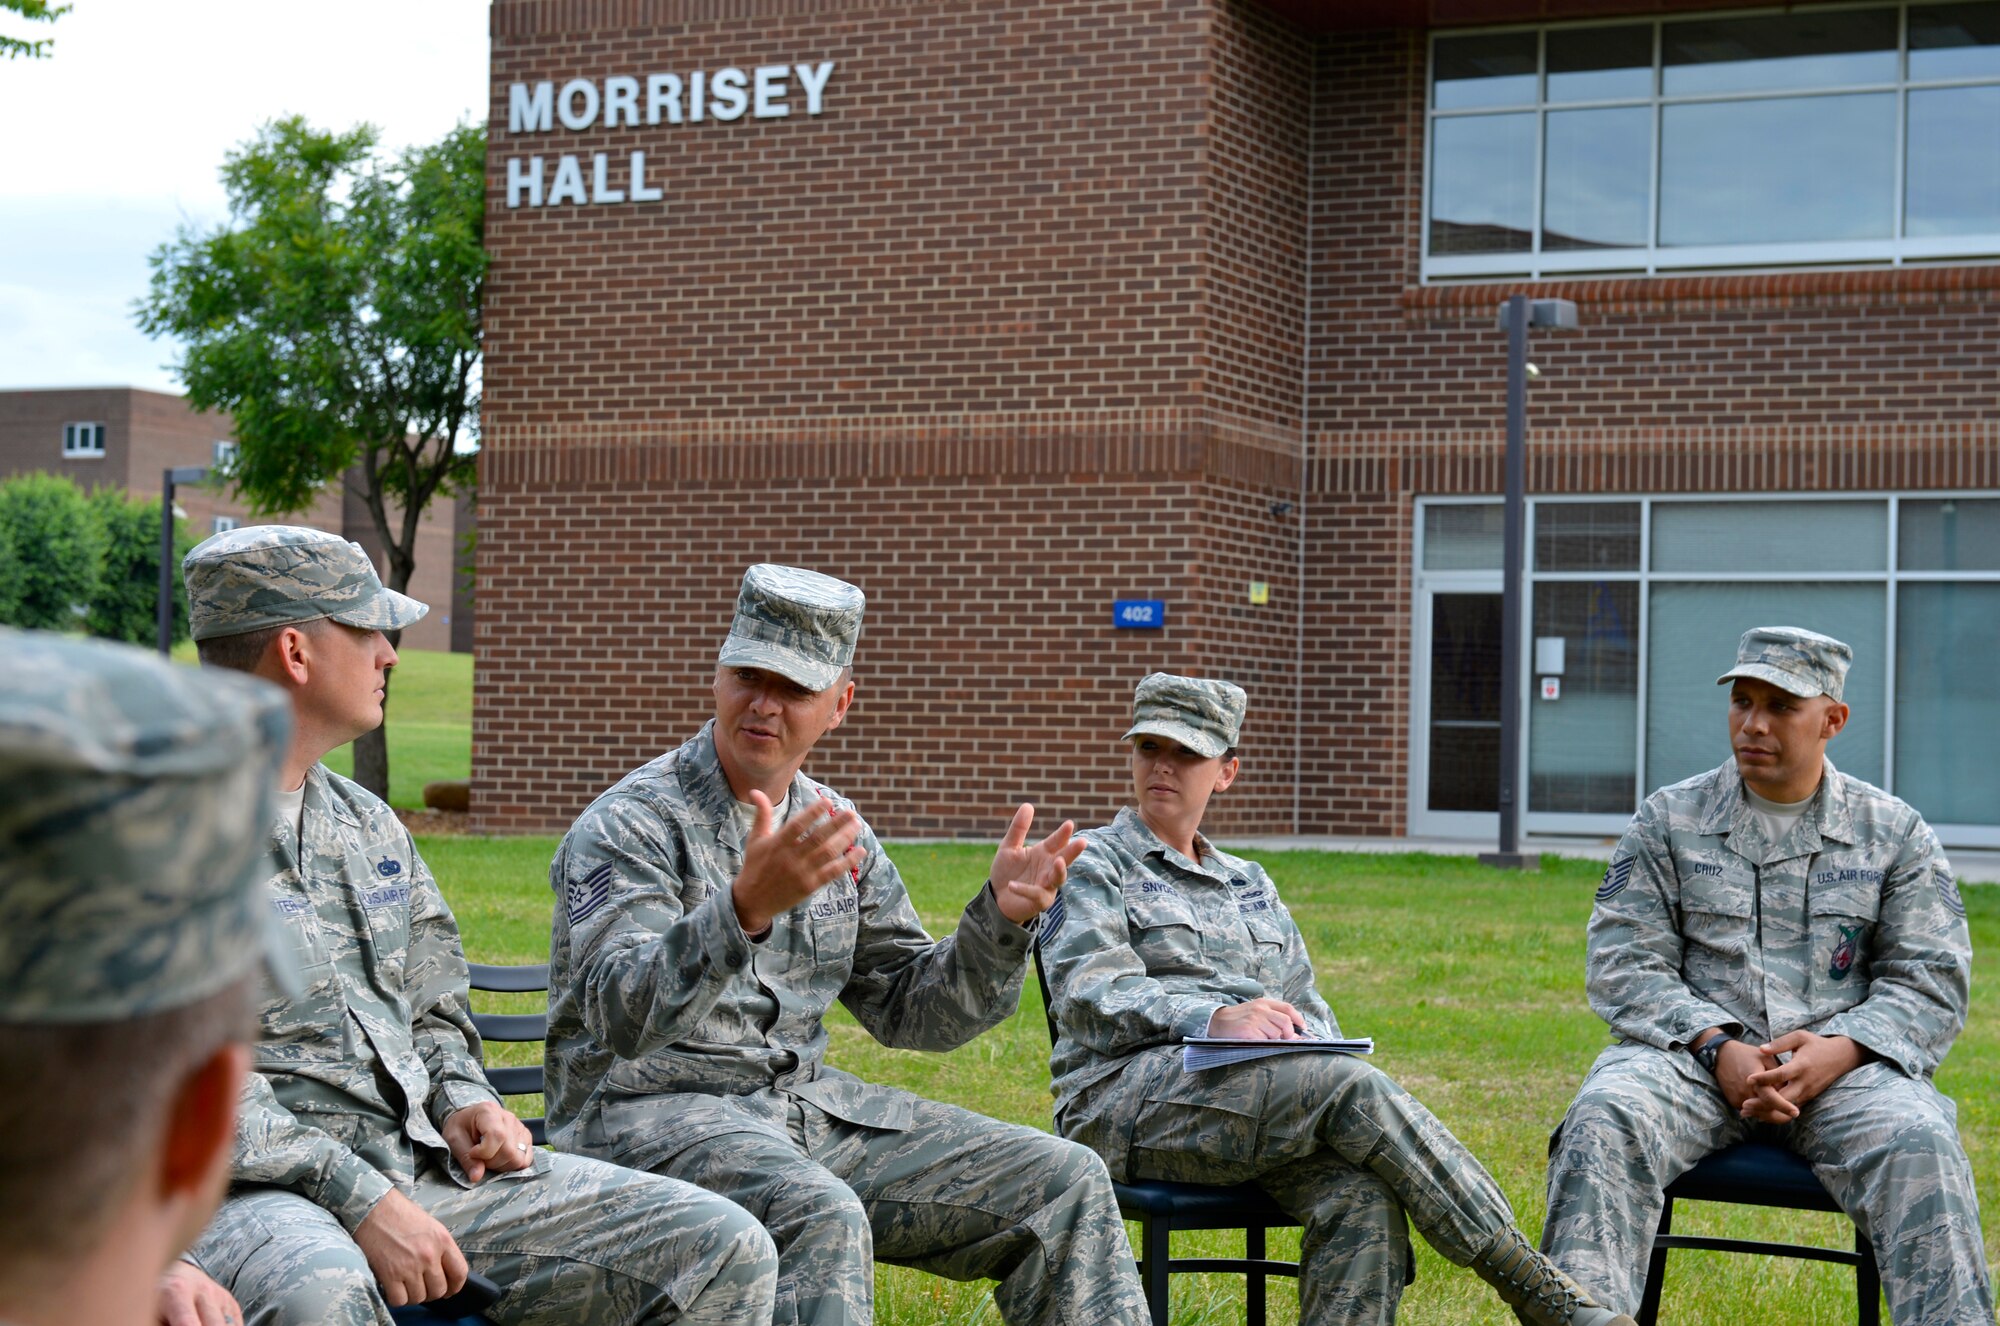 MCGHEE TYSON AIR NATIONAL GUARD BASE, Tenn. - Tech. Sgt. Donald O. Noel, instructor talking, discusses social media do's and don't's in the military to NCO Academy Class 14-5, B-flight, on the I.G. Brown Training and Education Center campus here, May 9, 2014. (U.S. Air National Guard photo by Master Sgt. Kurt Skoglund/Released)